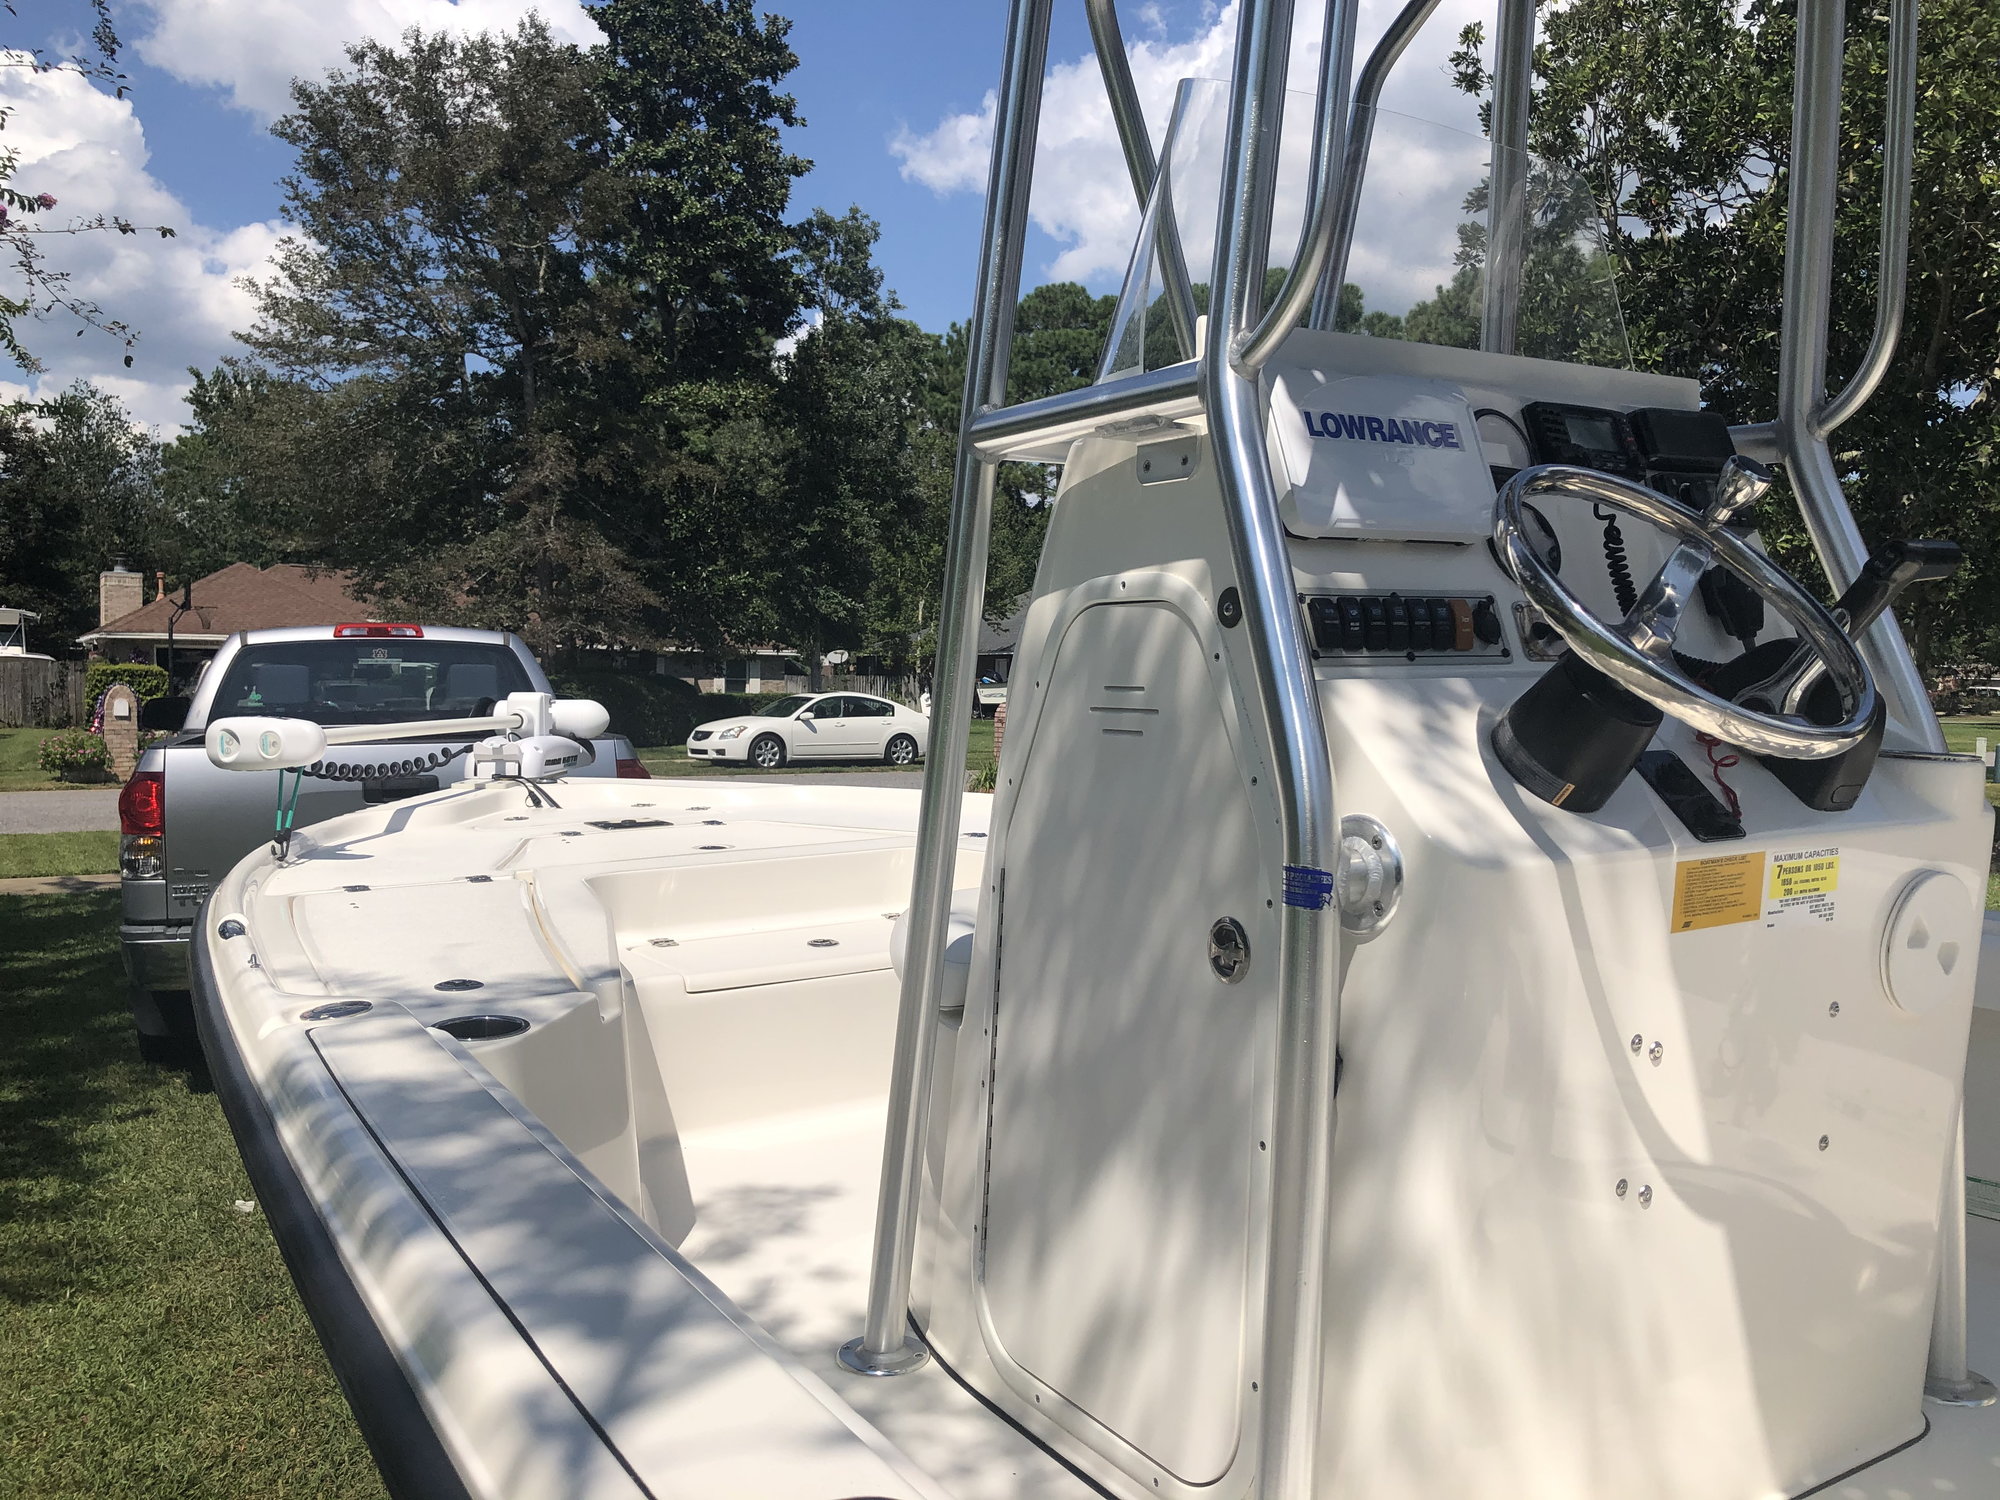 My new 2014 210 BR! - KEY WEST BOATS FORUM